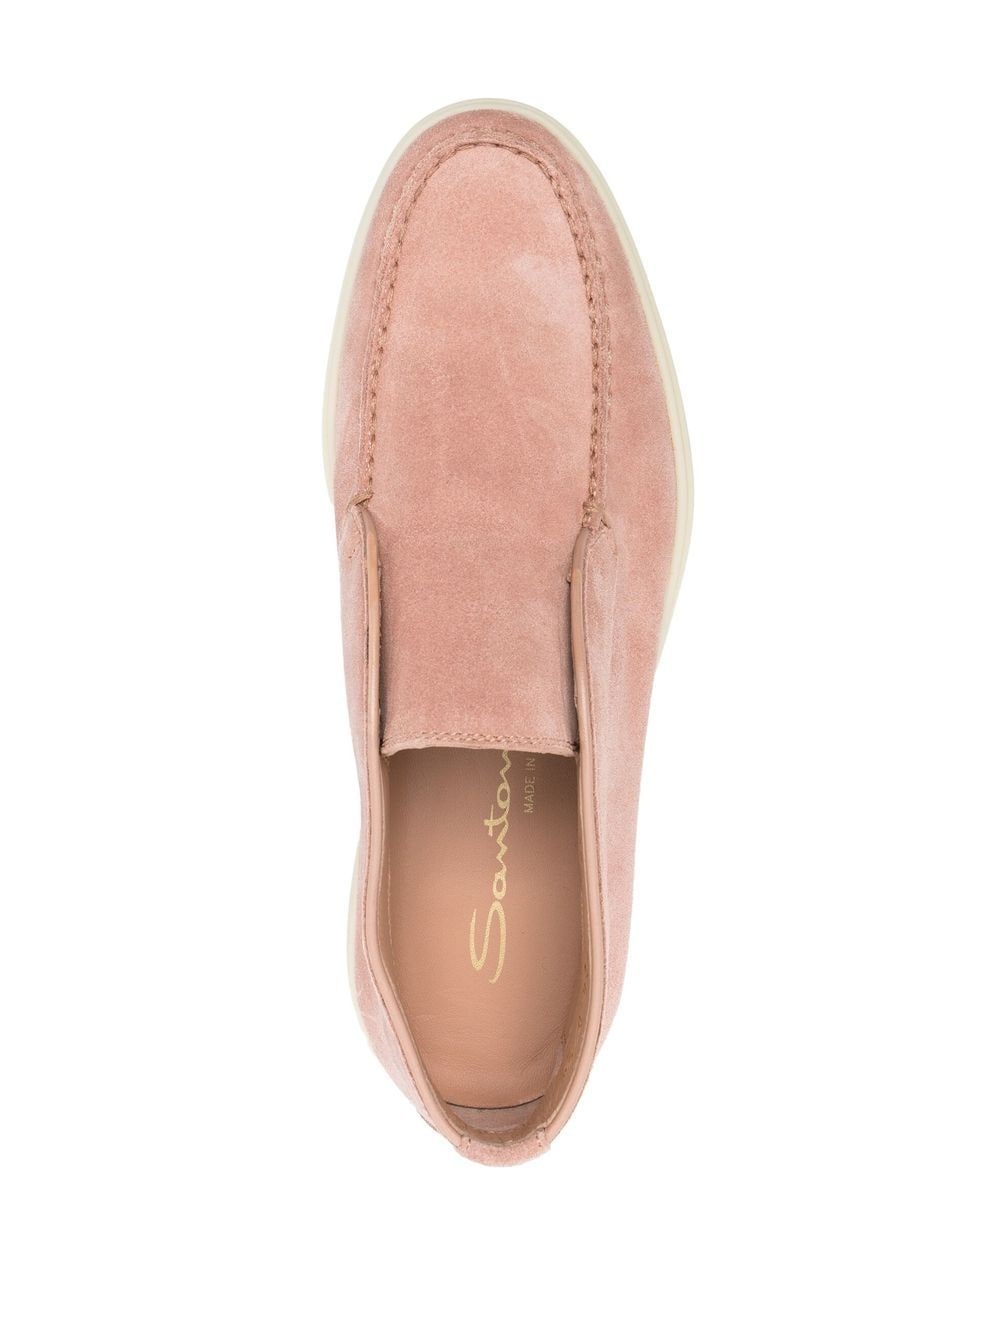 slip-on loafers - 4